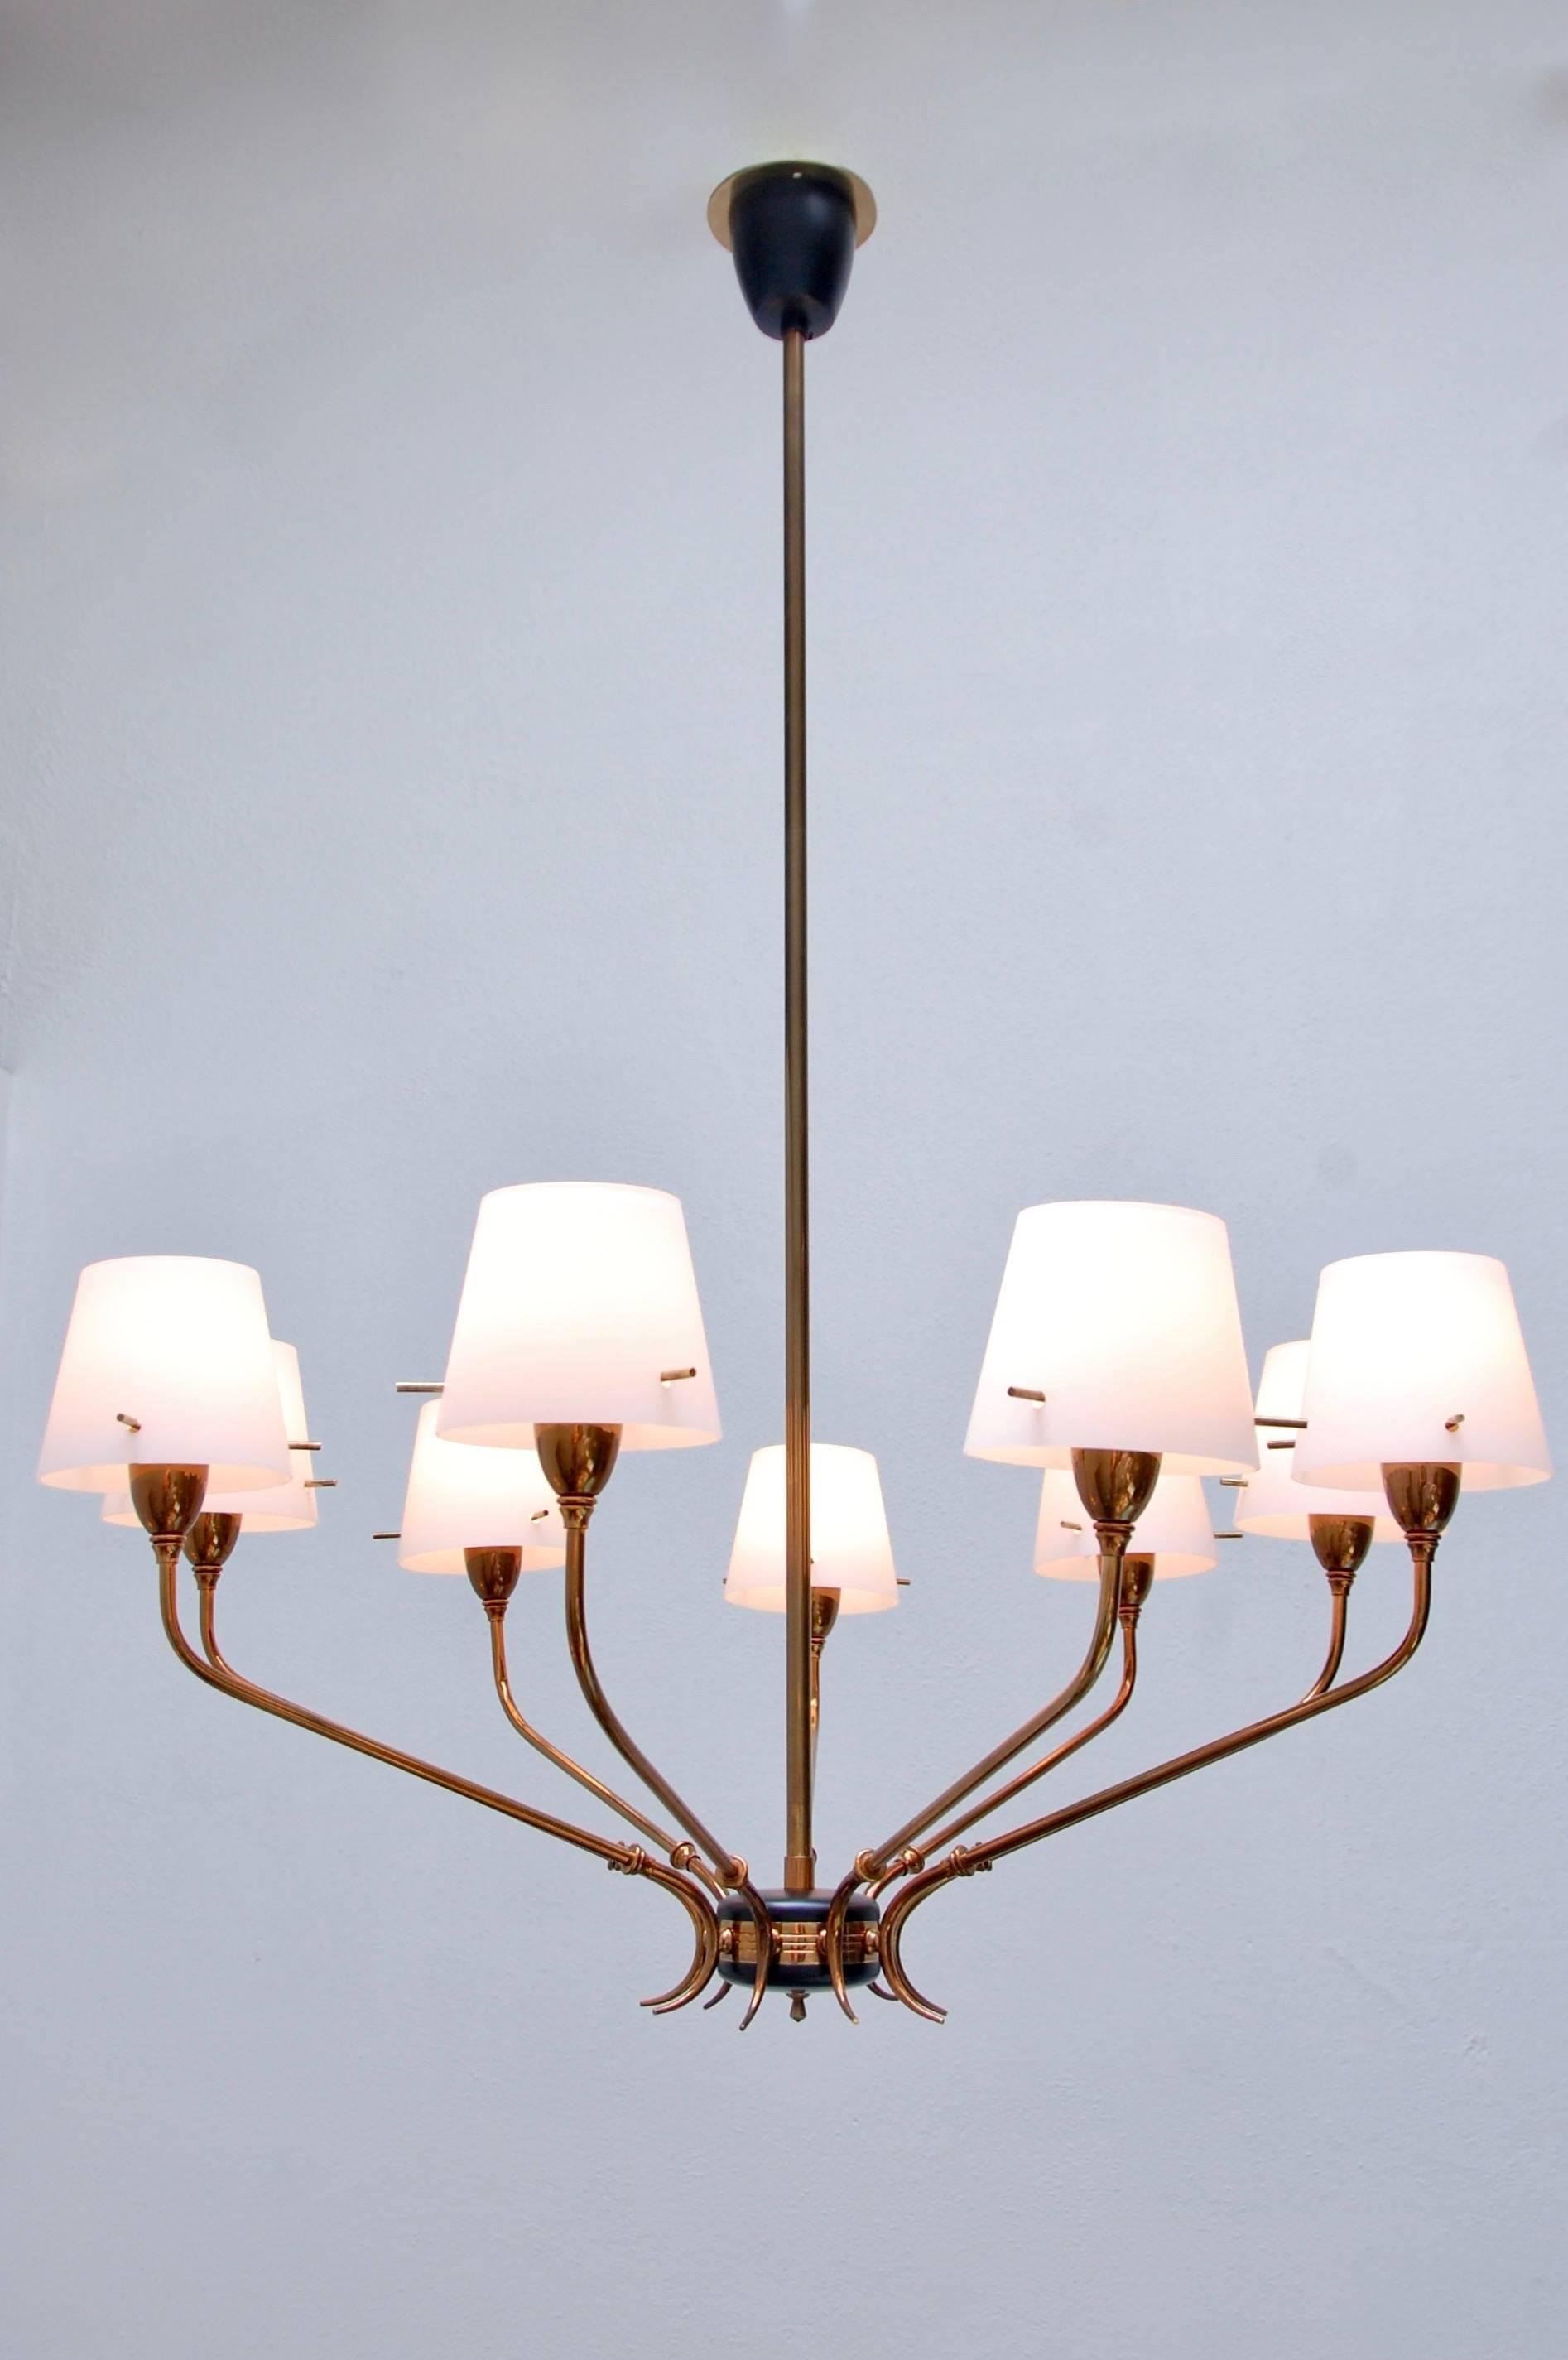 Of the period Italian chandelier with nine arms from the early 1950s. Fully restored, original glass shades, E12 candelabra based sockets, wired for the US. Drop adjustable upon request.
We at Lumfardo Luminaires do all the restorations of our